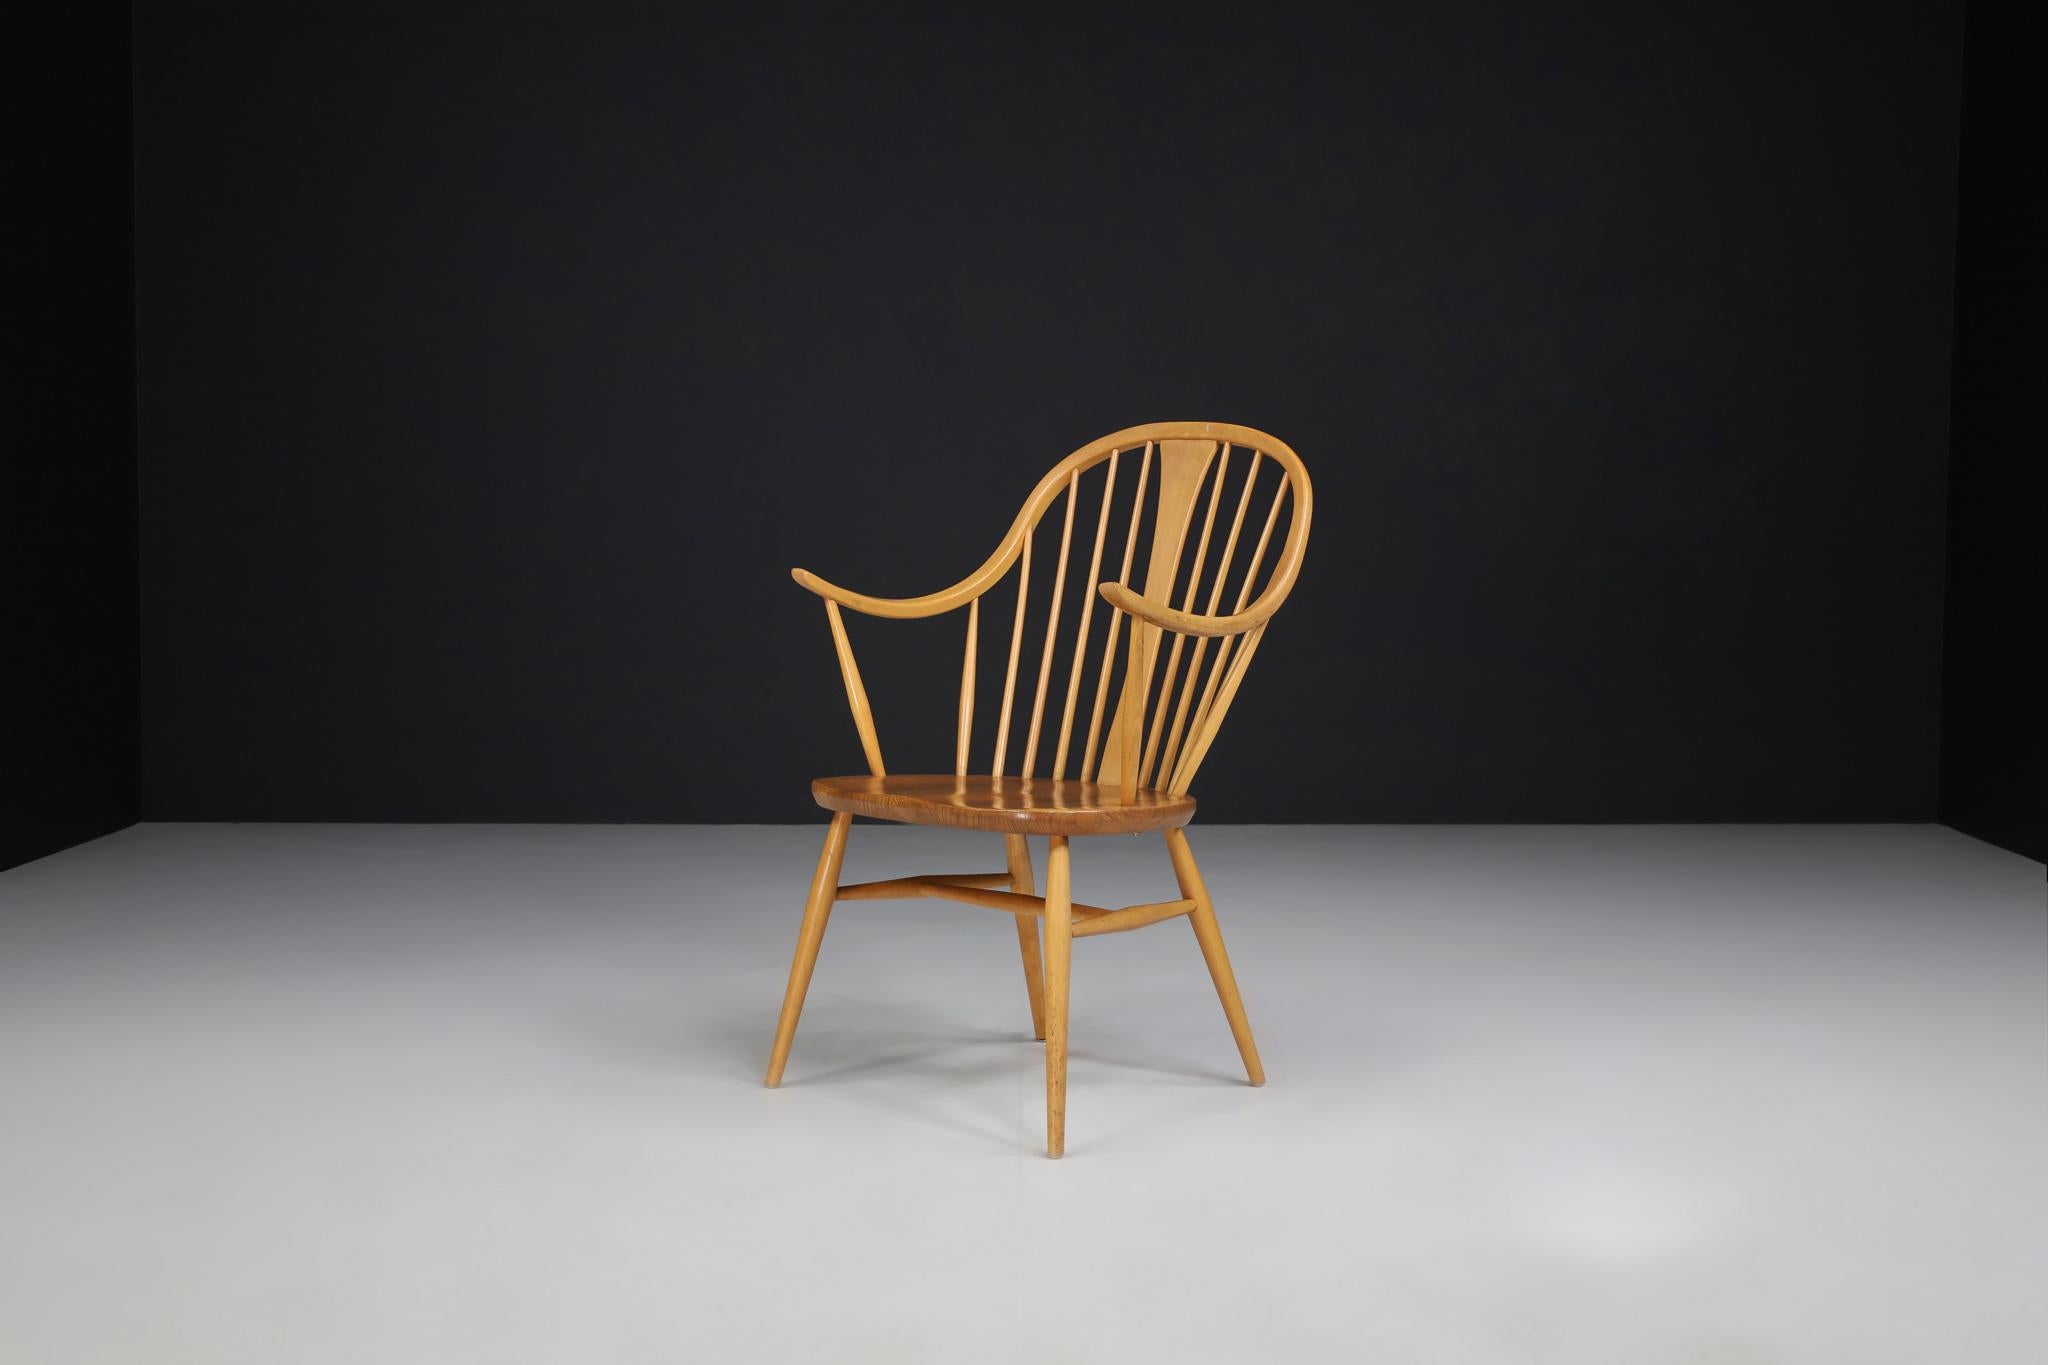 Mid-Century Ercol armchair in beechwood, England, 1960s

This chair is designed by Lucian Ercolani for Ercol in the 1960s. The wooden frame is made out of beech and features an elegant backrest with slim, upright slats structuring the back.